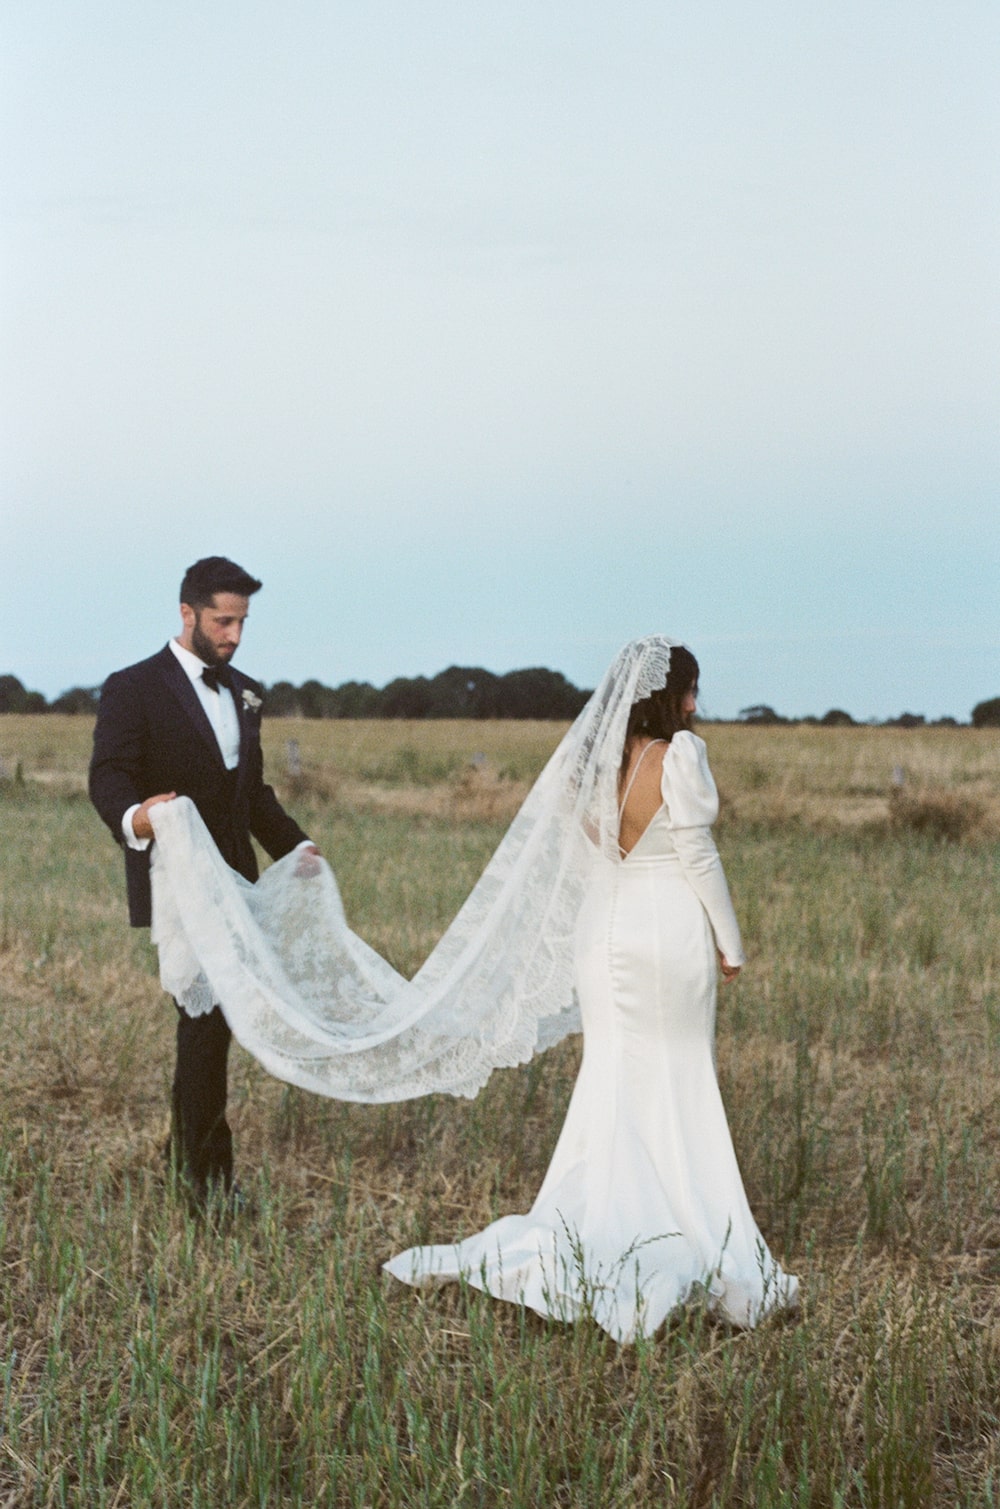 Bride and groom portrait in a field. Groom is holding brides mantilla veil up off the ground.